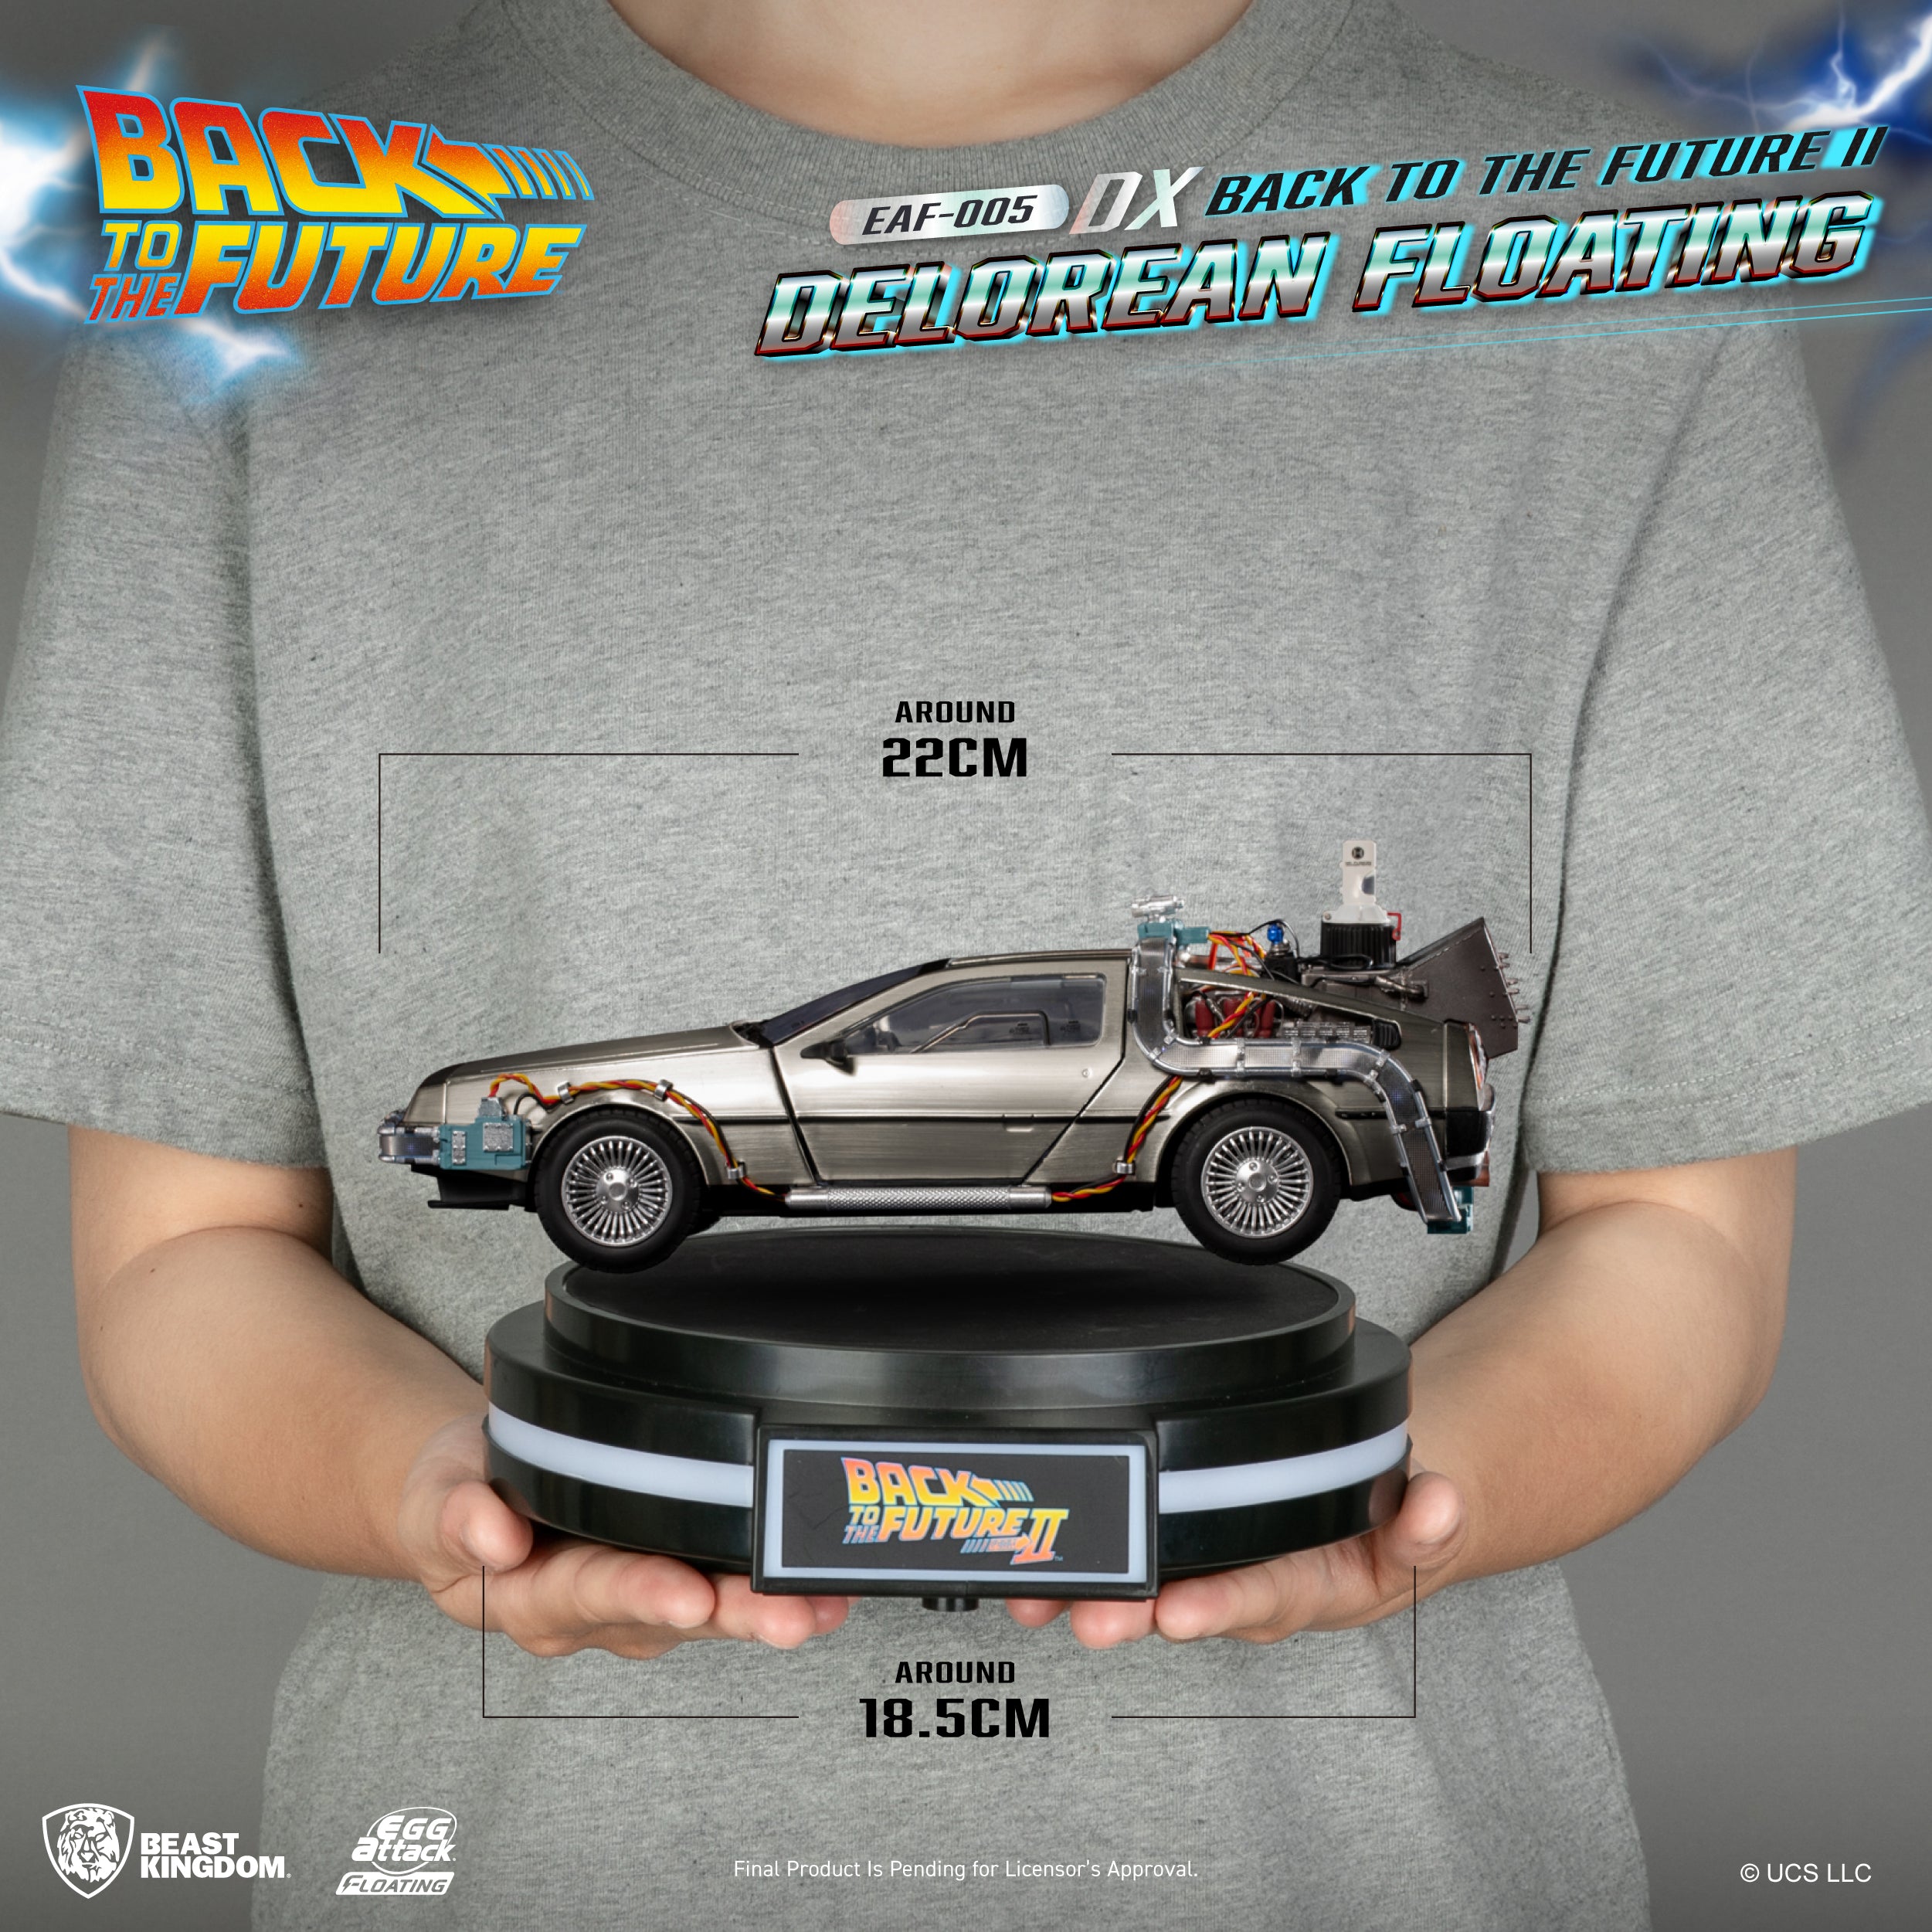 .com: Kids Logic 1/20 Magnetic Floating Delorean Time Machine Back to  The Future Part II Action Figure : Toys & Games